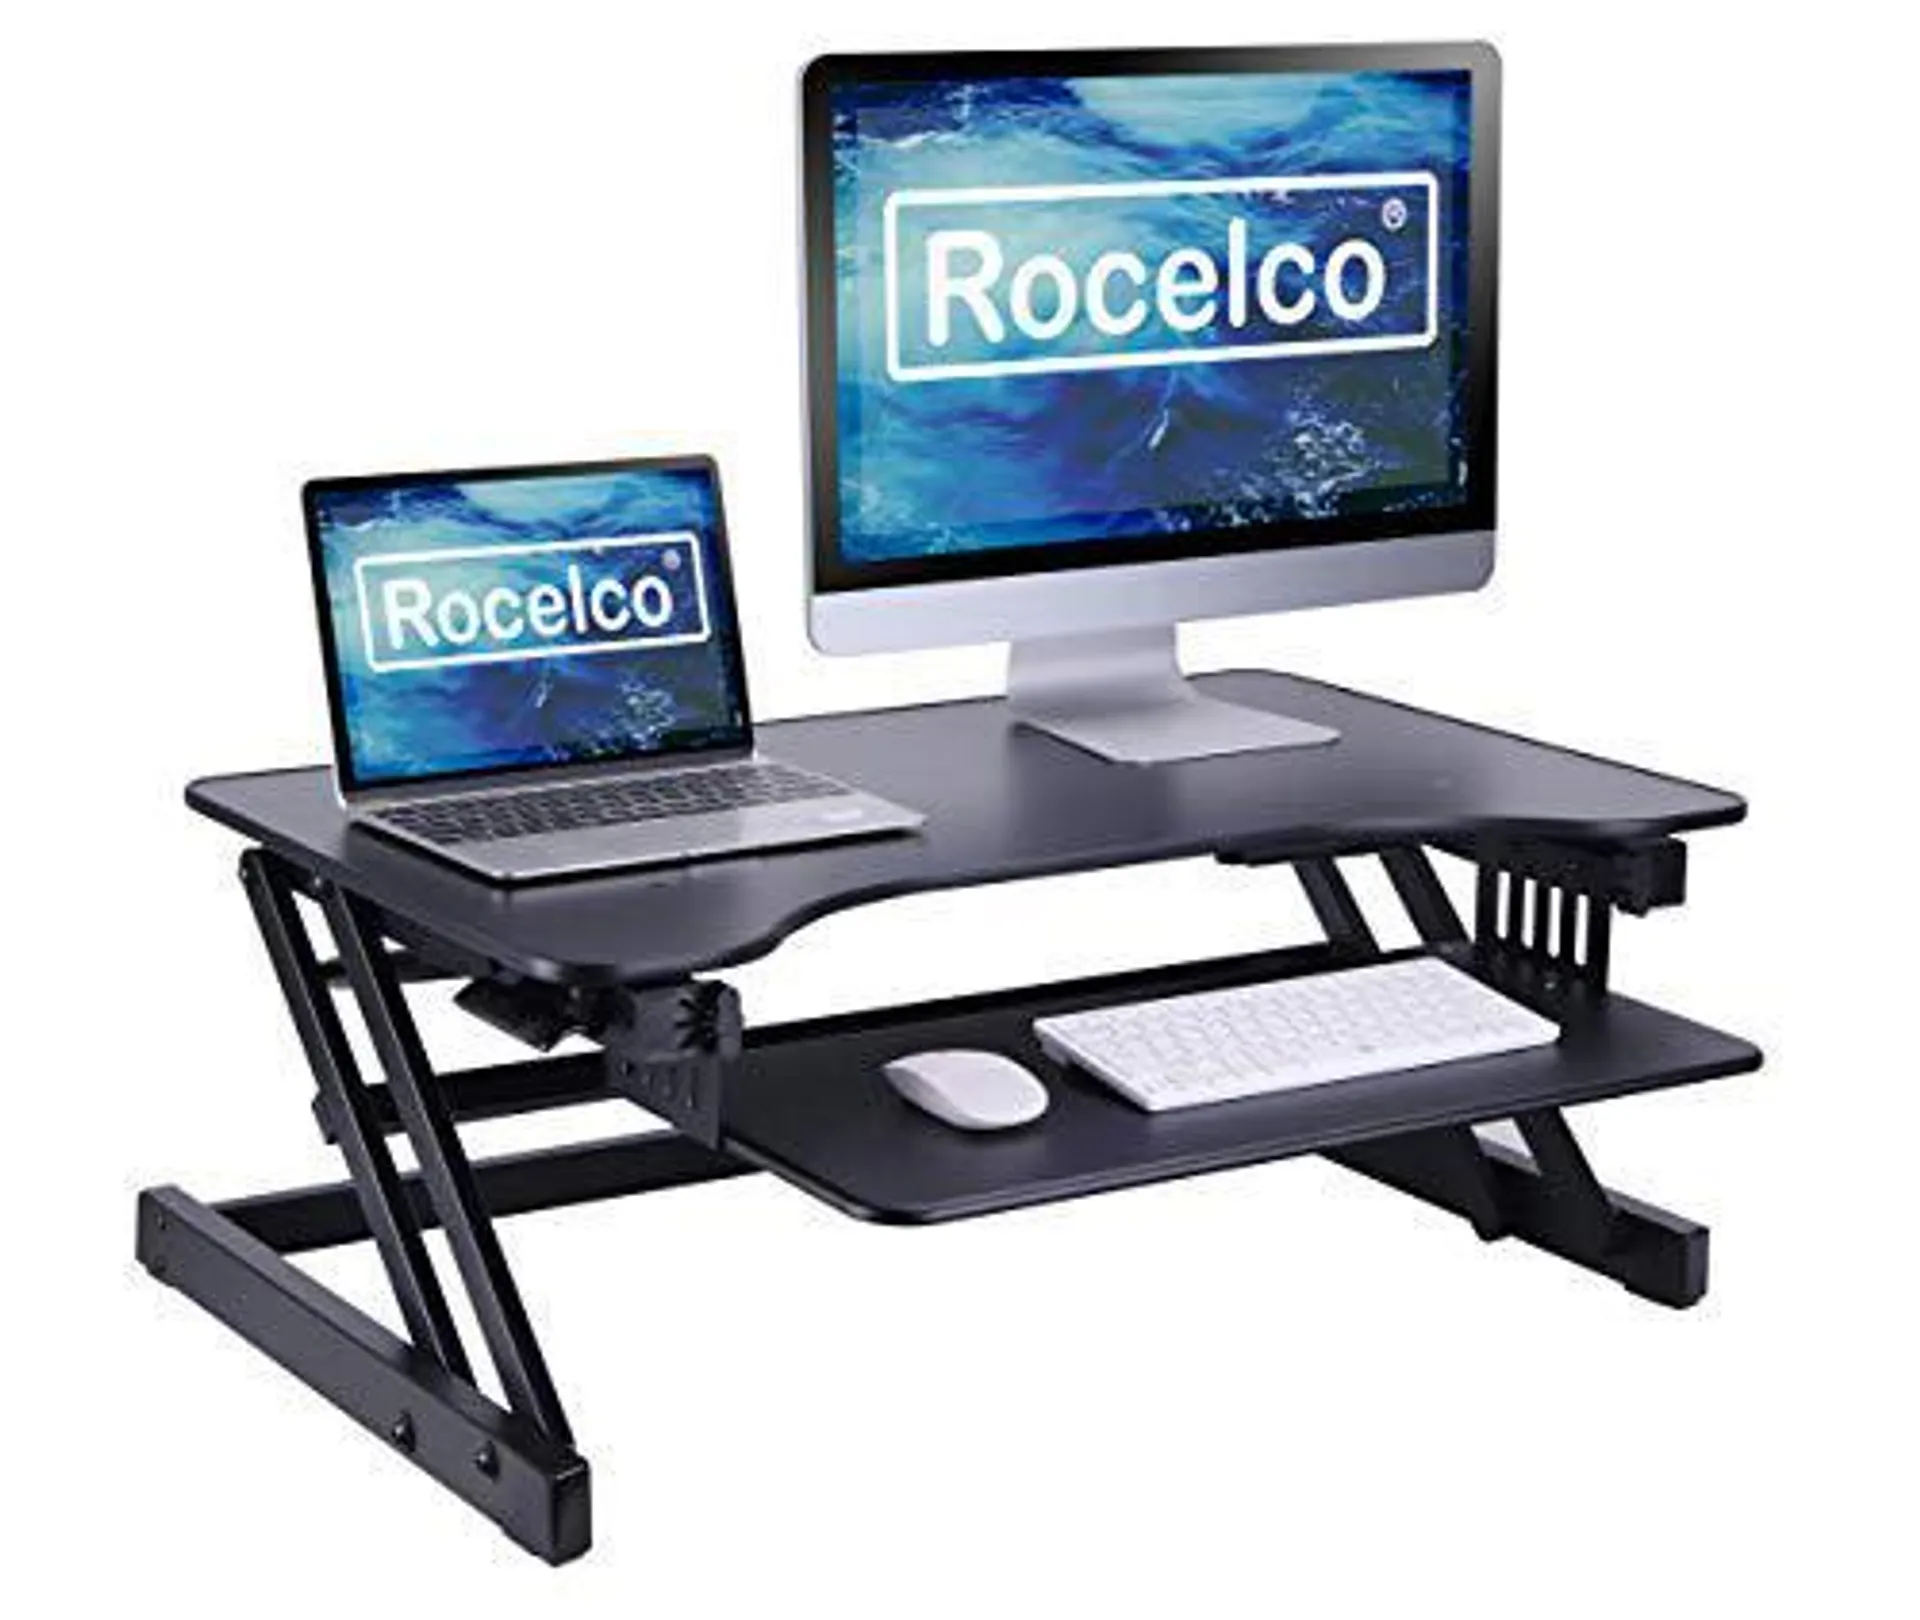 rocelco 32" height adjustable standing desk converter - quick sit stand up dual monitor riser - gas spring assist tabletop co